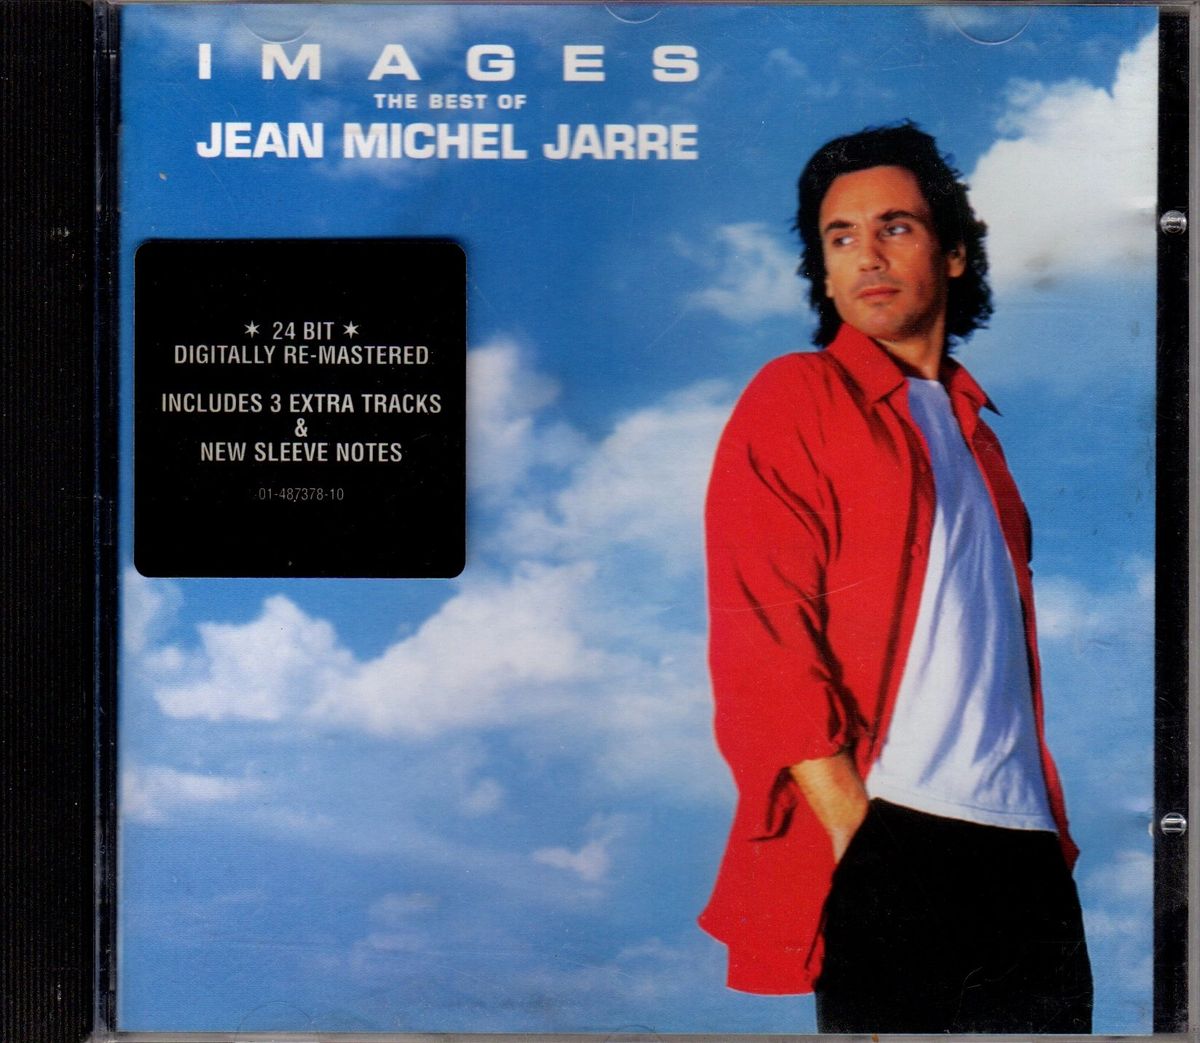 Audio CD, Jean Michel Jarre, IMAGES - The Best Of, Modern Classical, New  Age, Ambient